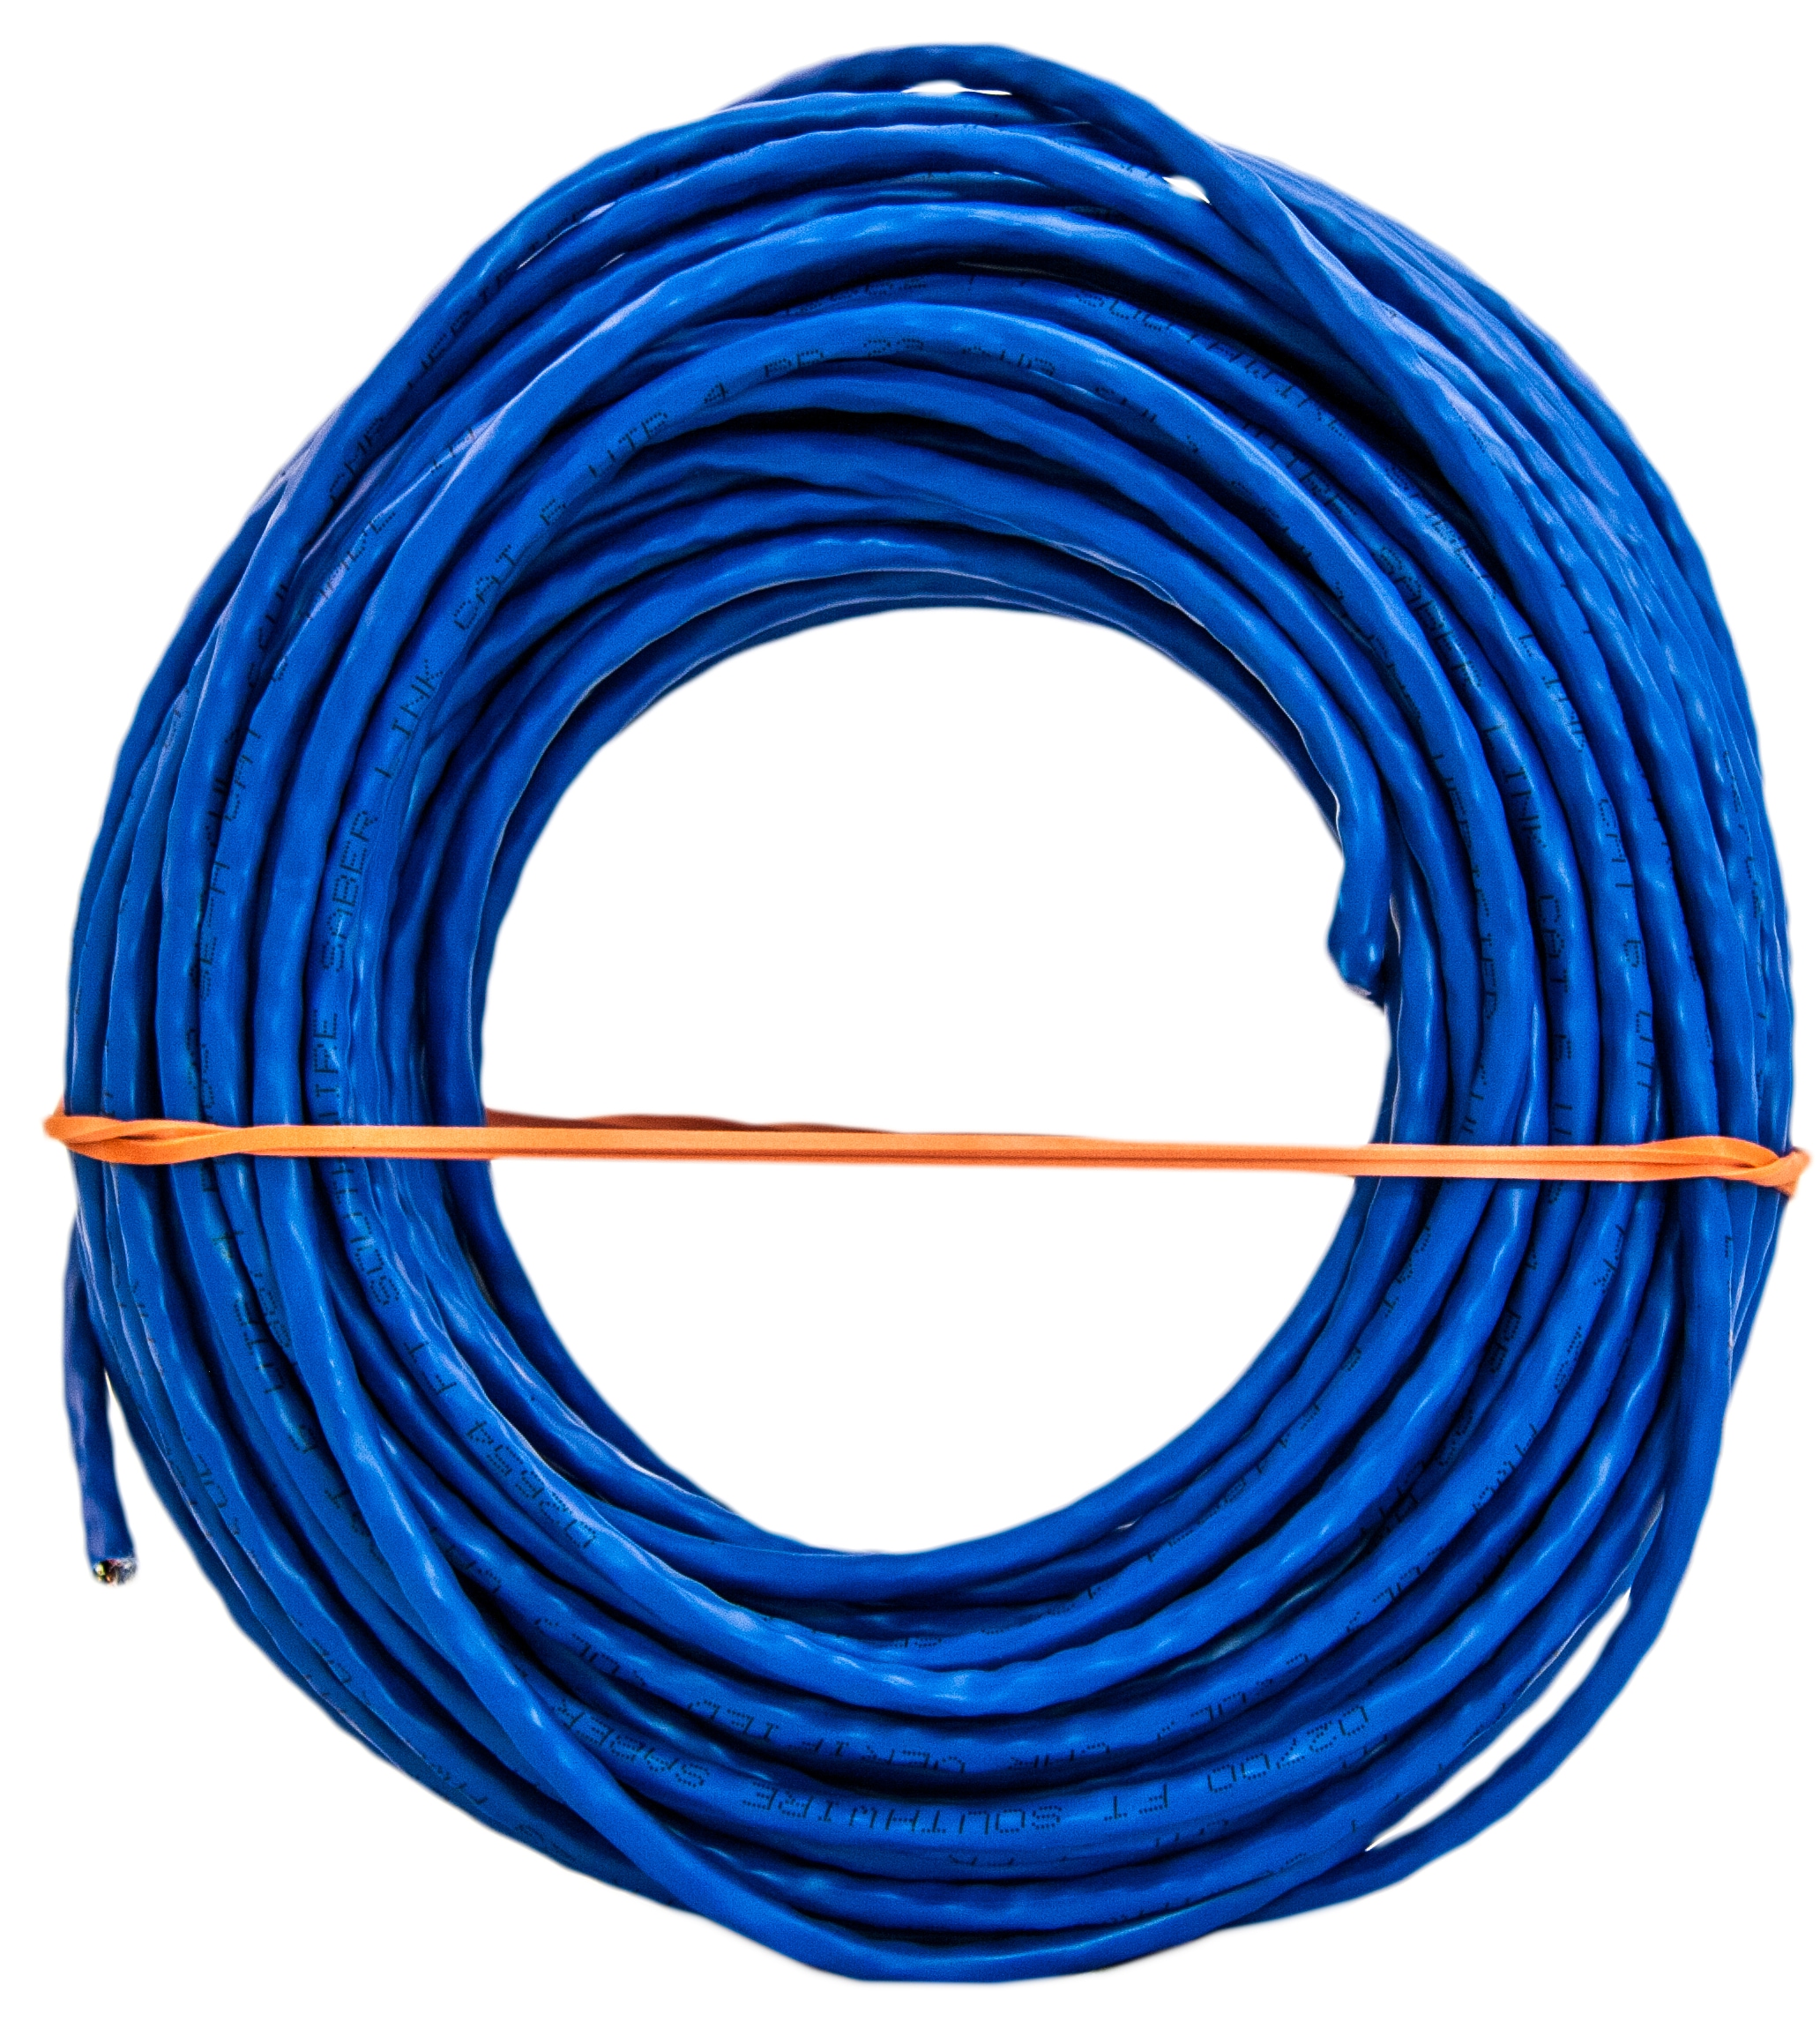 CABLE 6 mm - 100 M AZUL